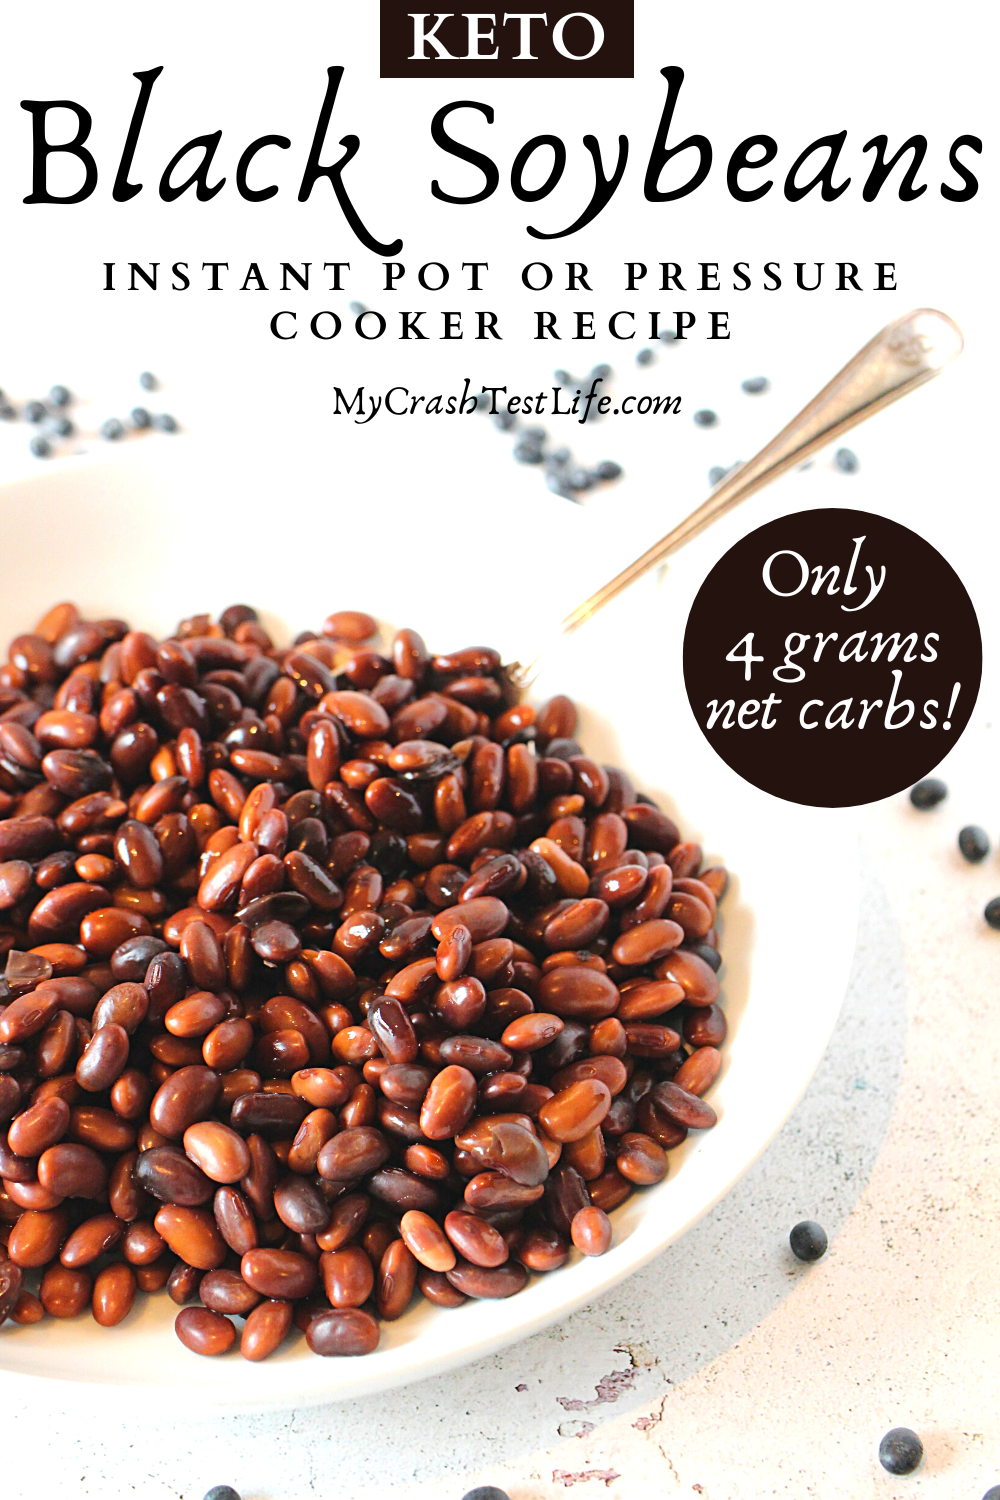 how to cook black soybeans in a pressure cooker - keto plant-based recipe